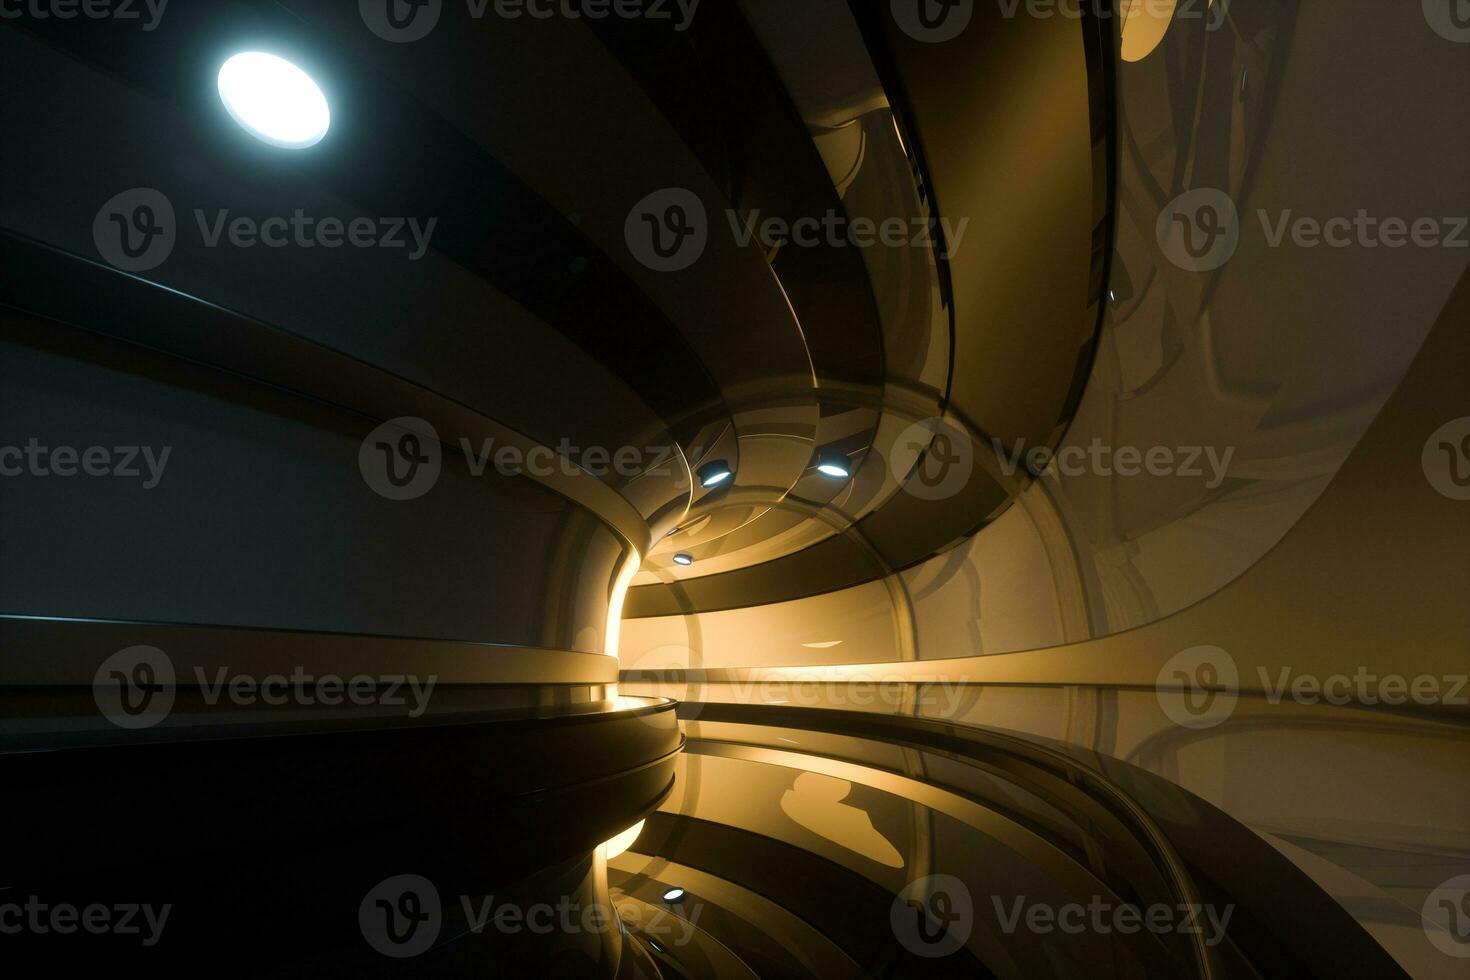 Dark tunnel with light at the end, 3d rendering. photo